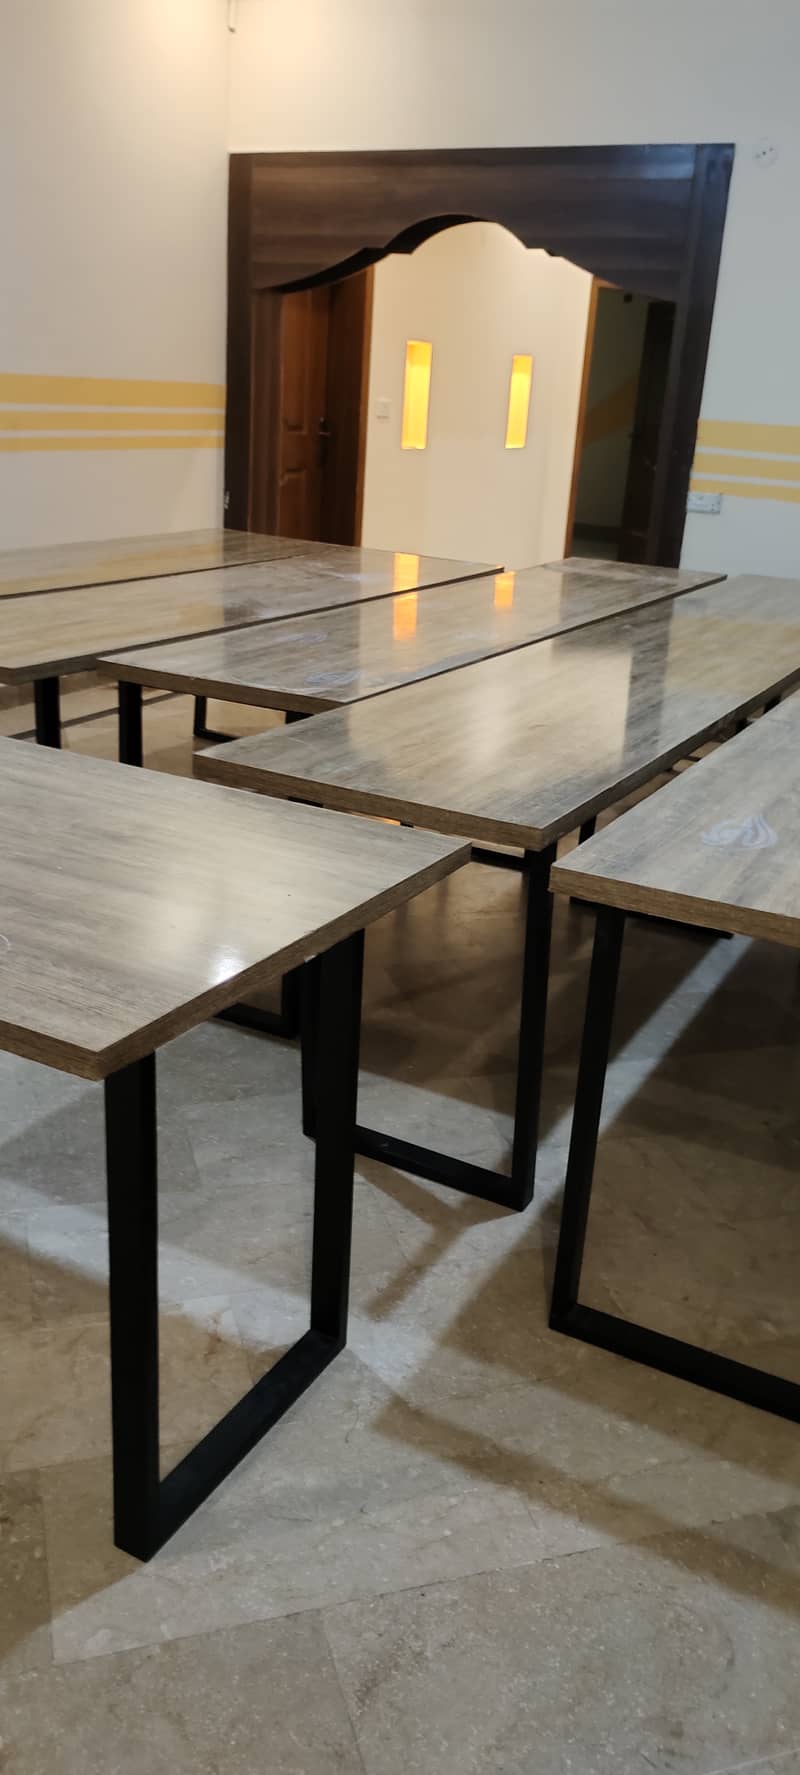 7 COMPUTER TABLE RS. 1150 PER SQ. FT. FOR CALL CENTER OR SOFTWARE HOUSE 11